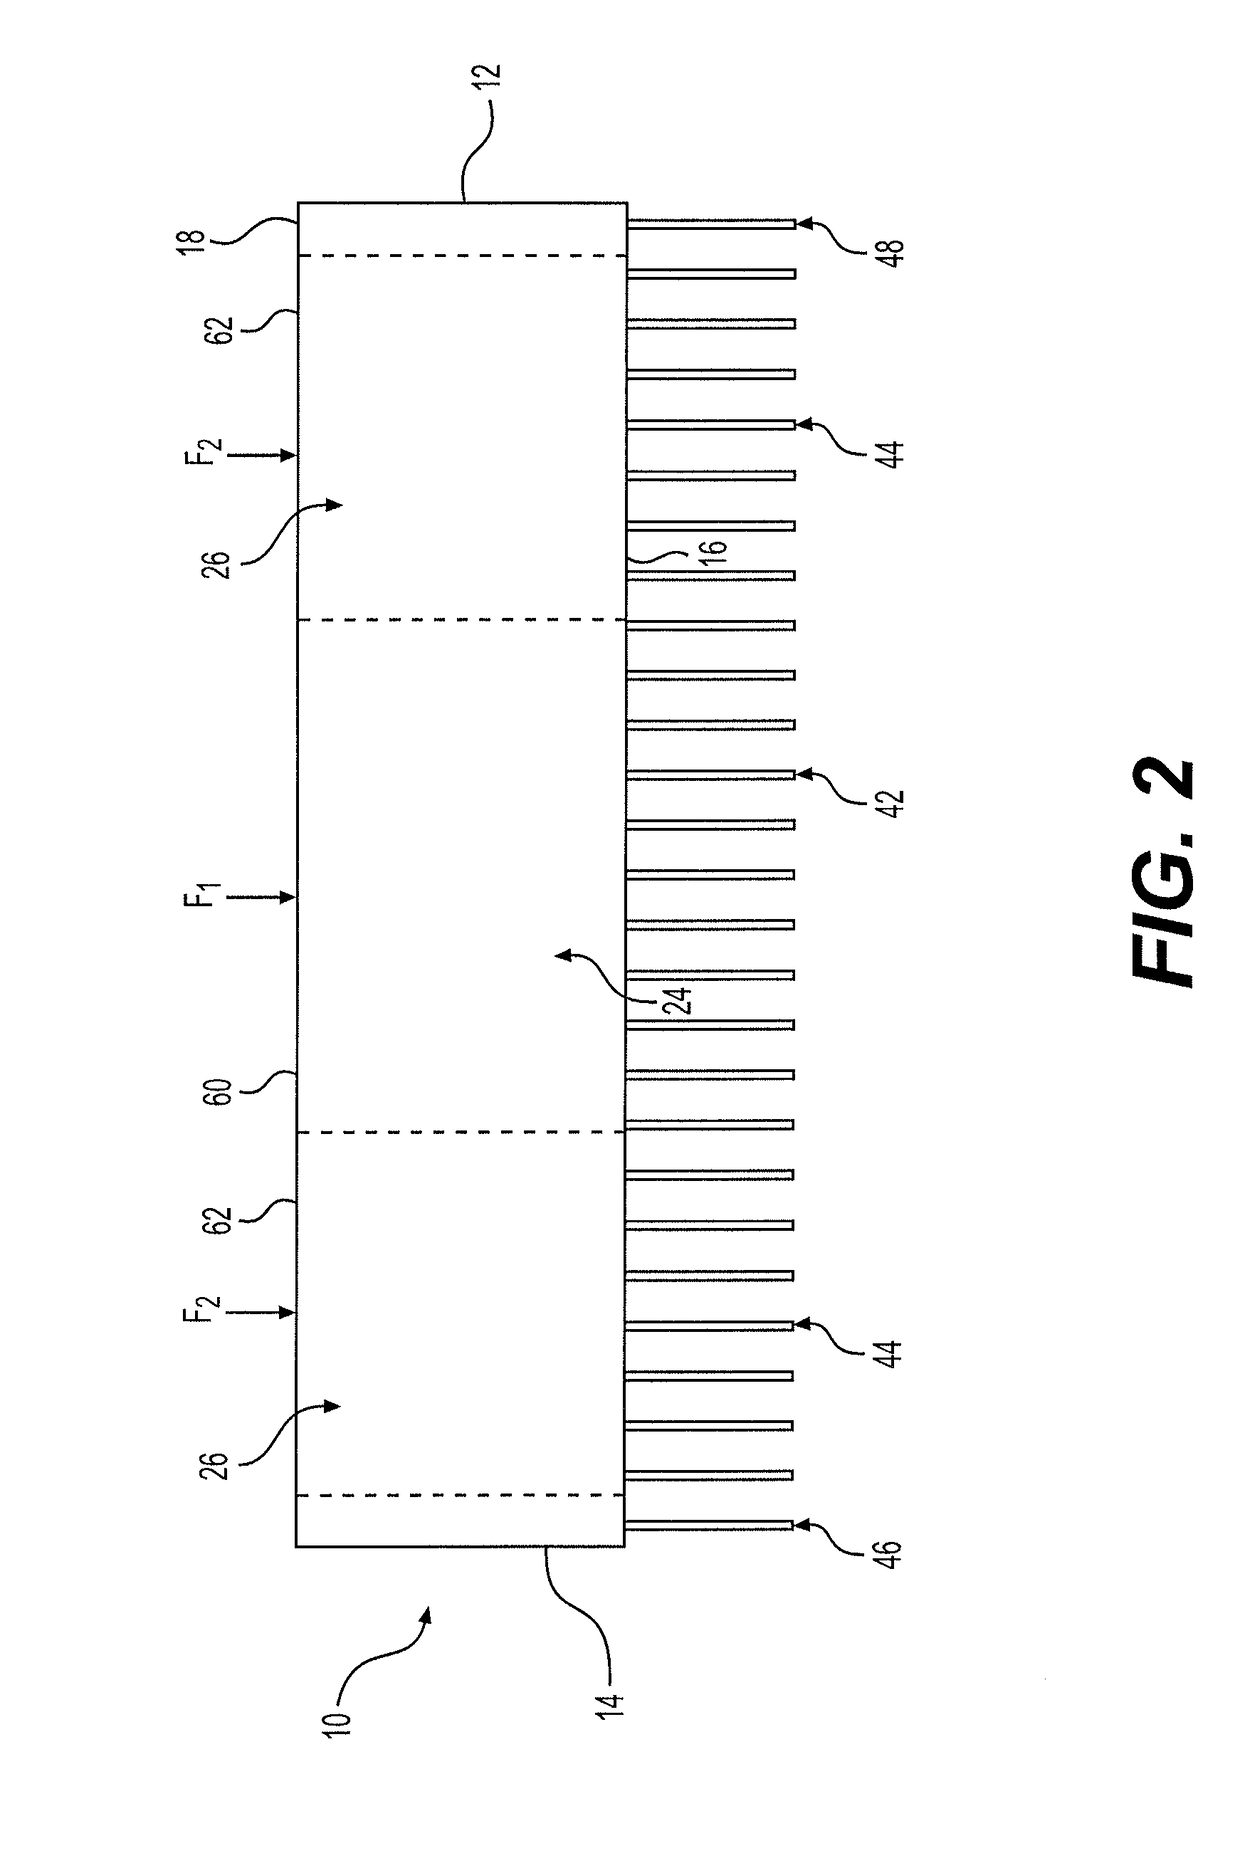 Combination microarray patch for drug delivery and electrochemotherapy device